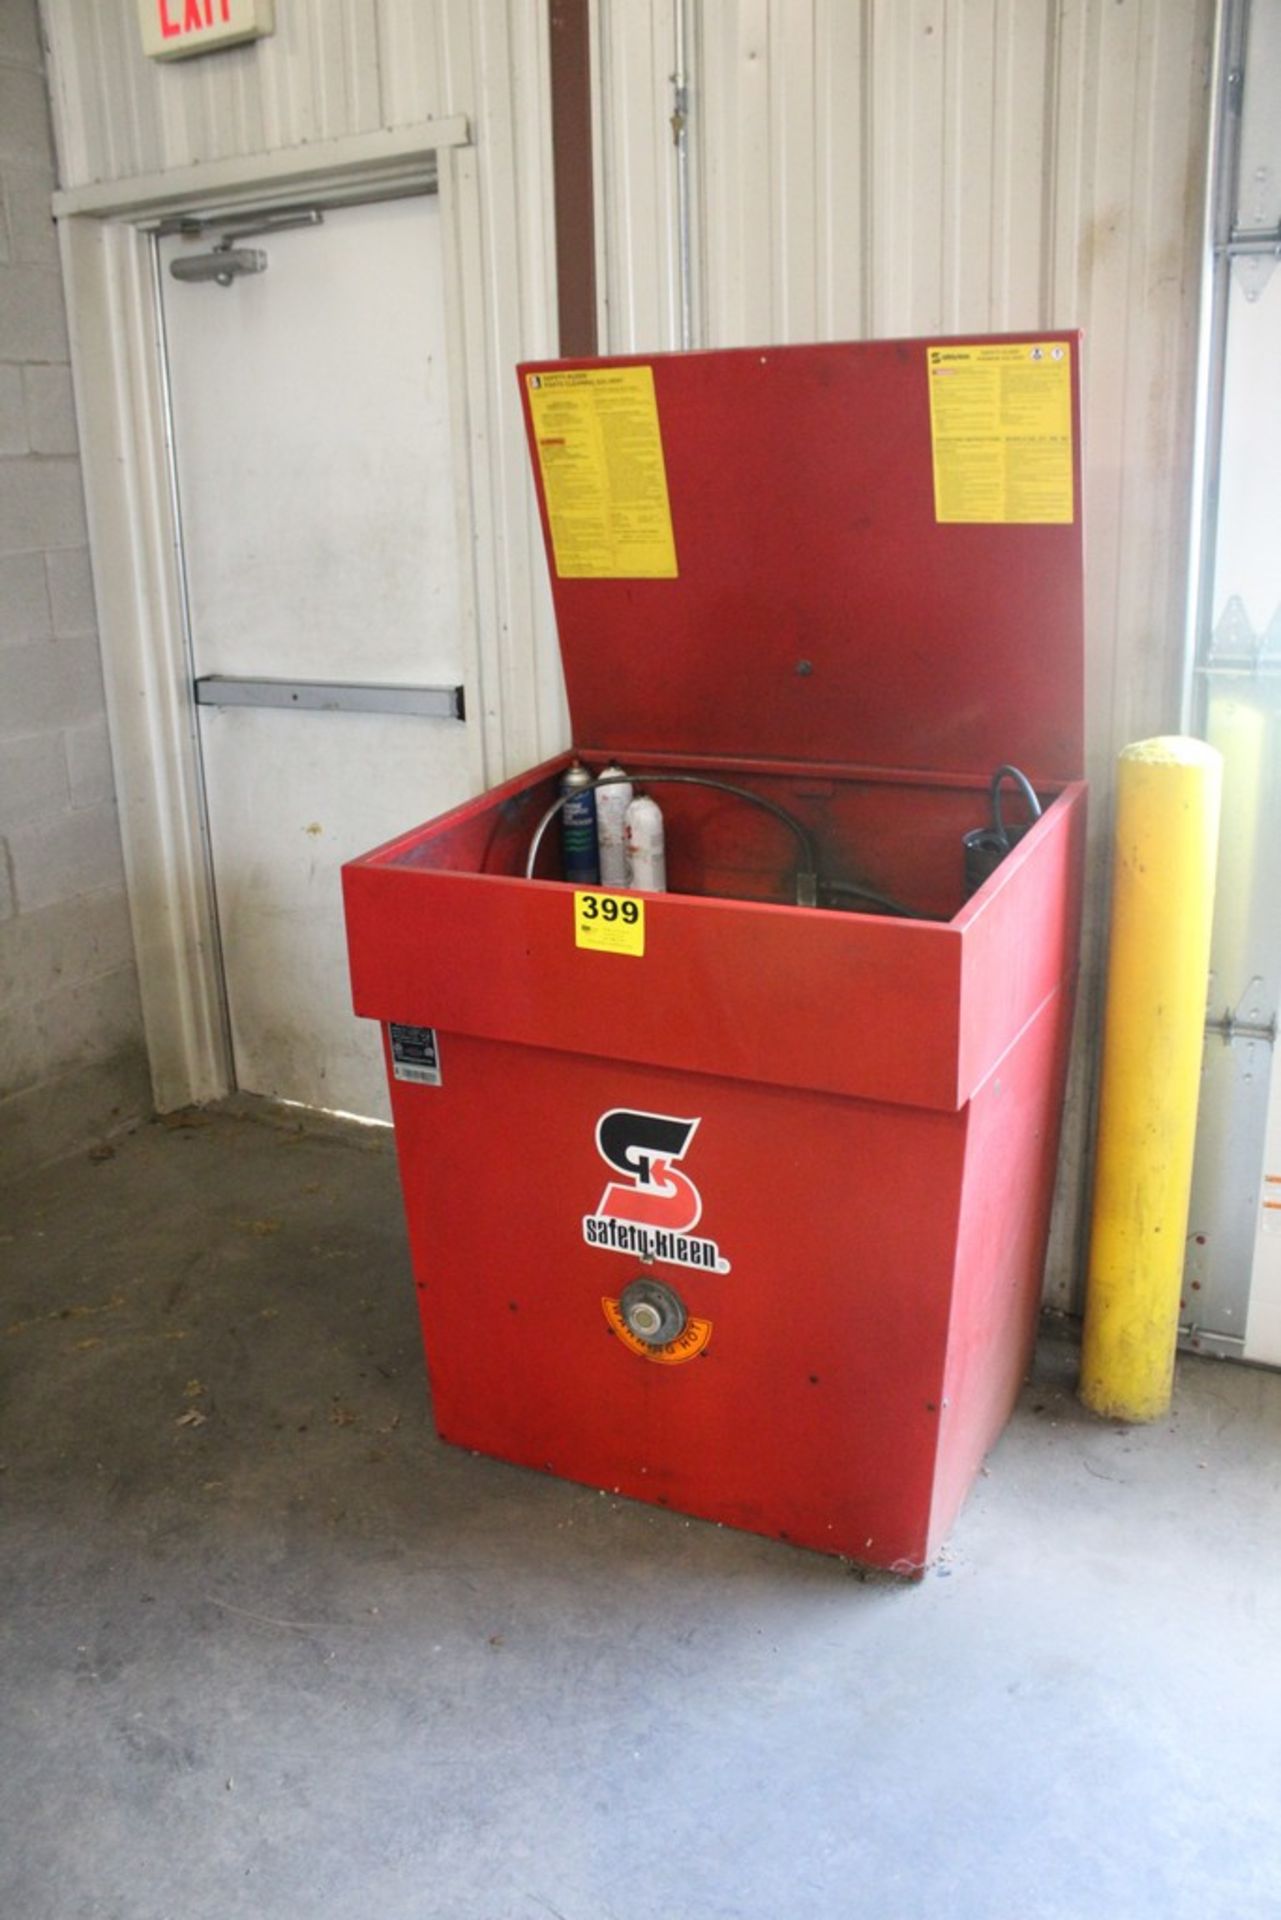 SAFETY CLEAN PARTS WASHING STATION, 40" X 36" X 27"